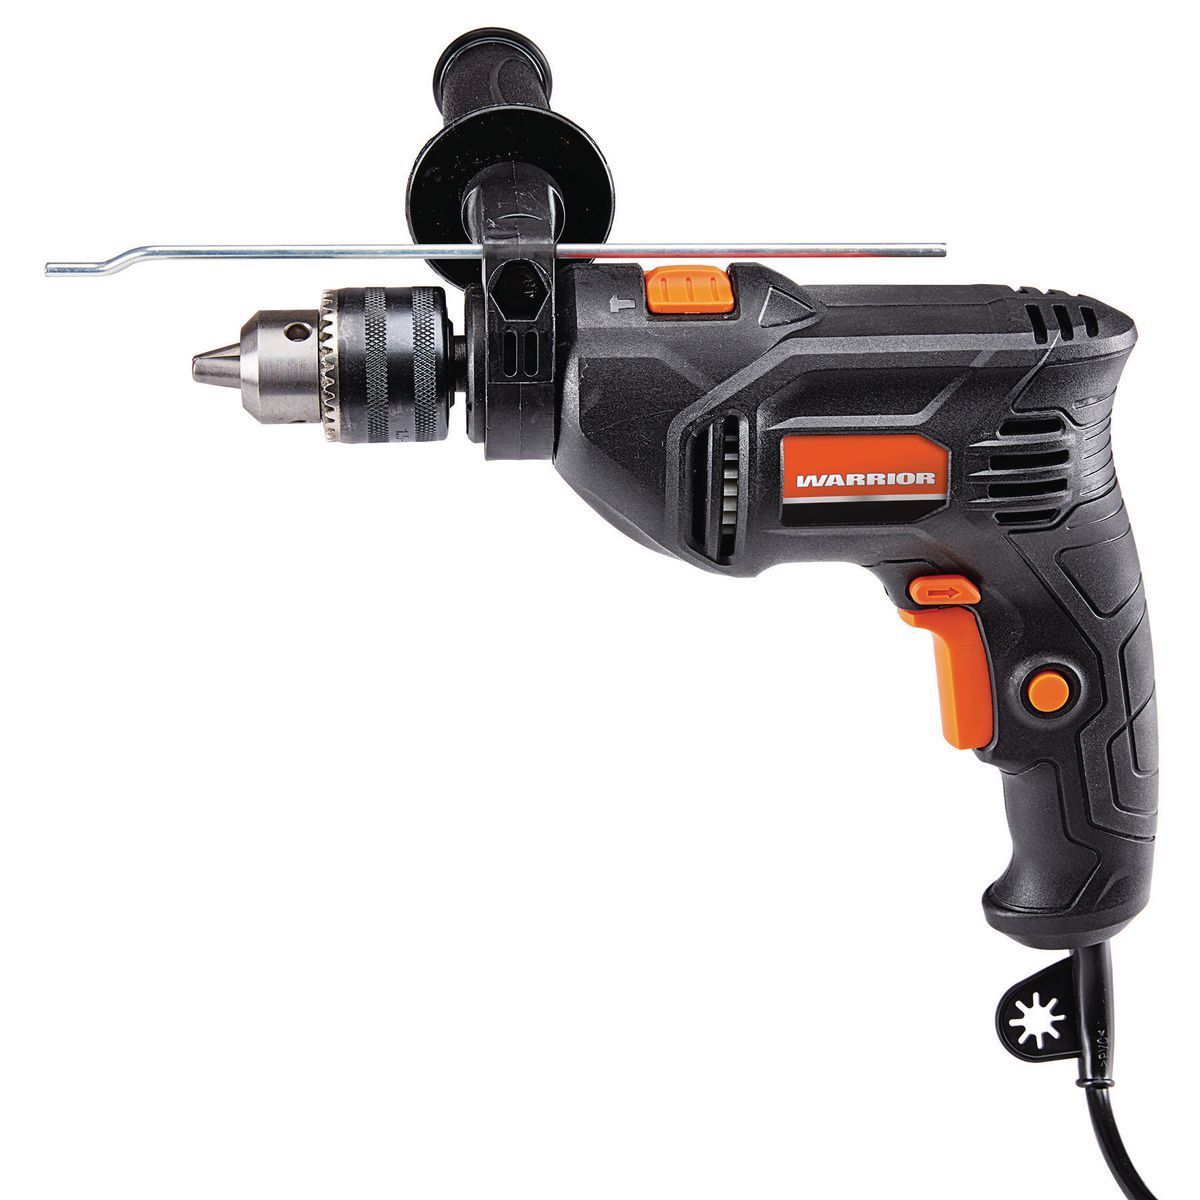 4.5 Amp 1/2 in. Single Speed Hammer Drill/Driver